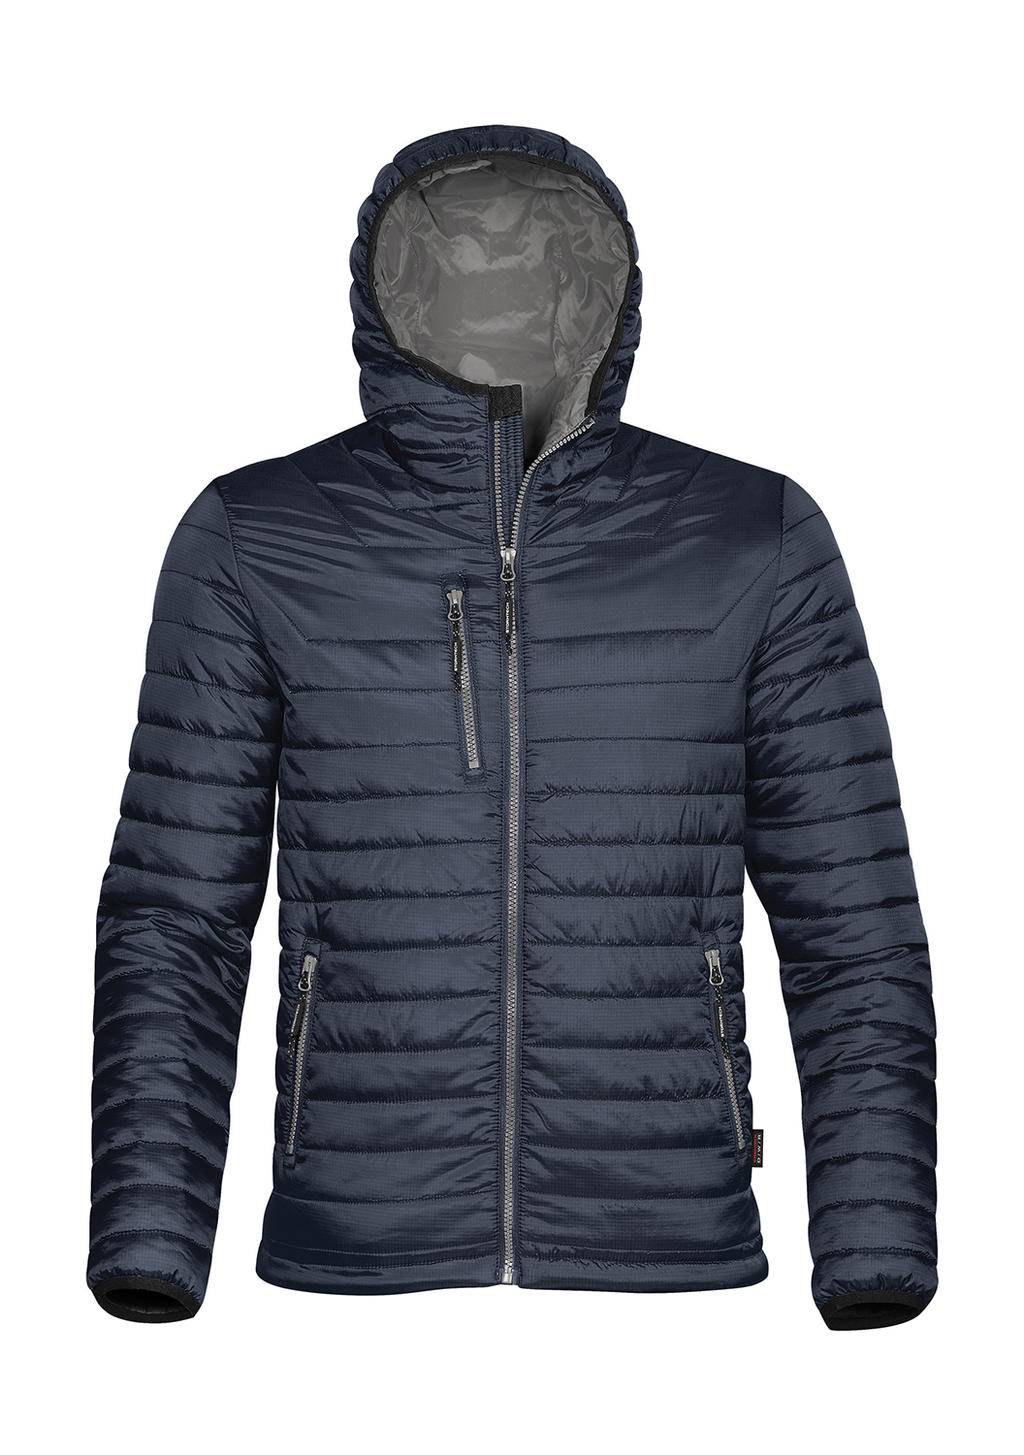  Gravity Thermal Jacket in Farbe Navy/Charcoal